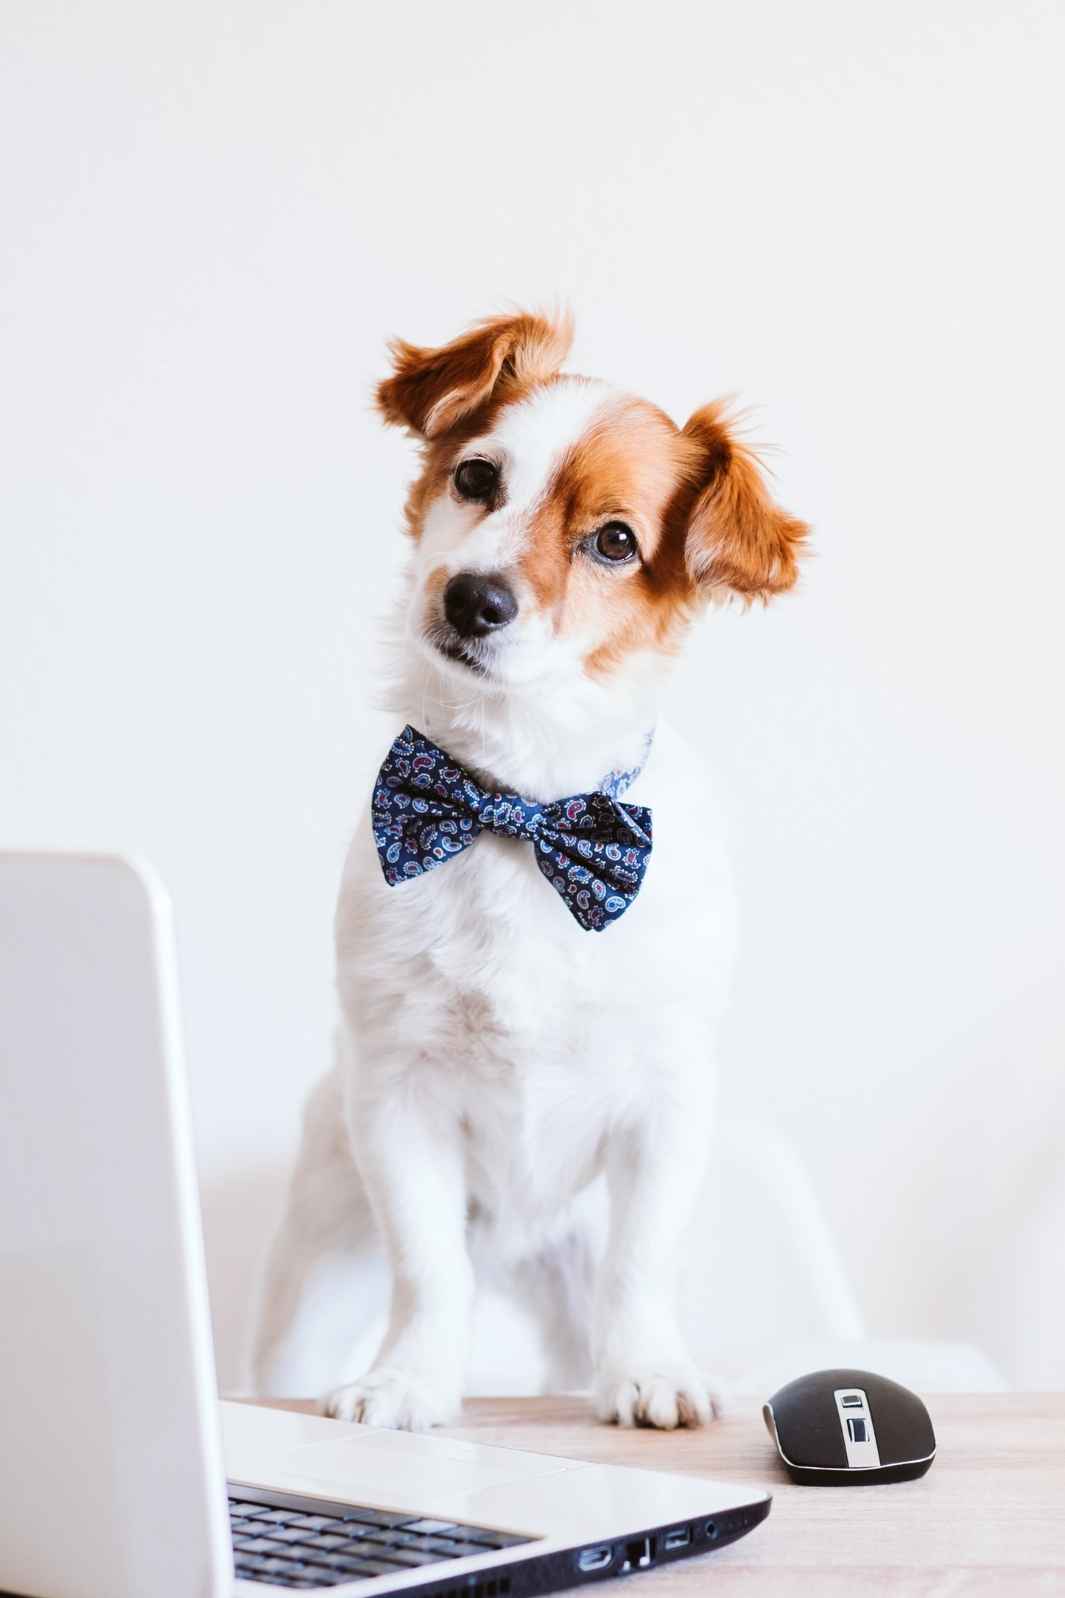 Adorable Jack Russell Terrier with bow tie for 5 Reasons to Take Your Dog Work Week.